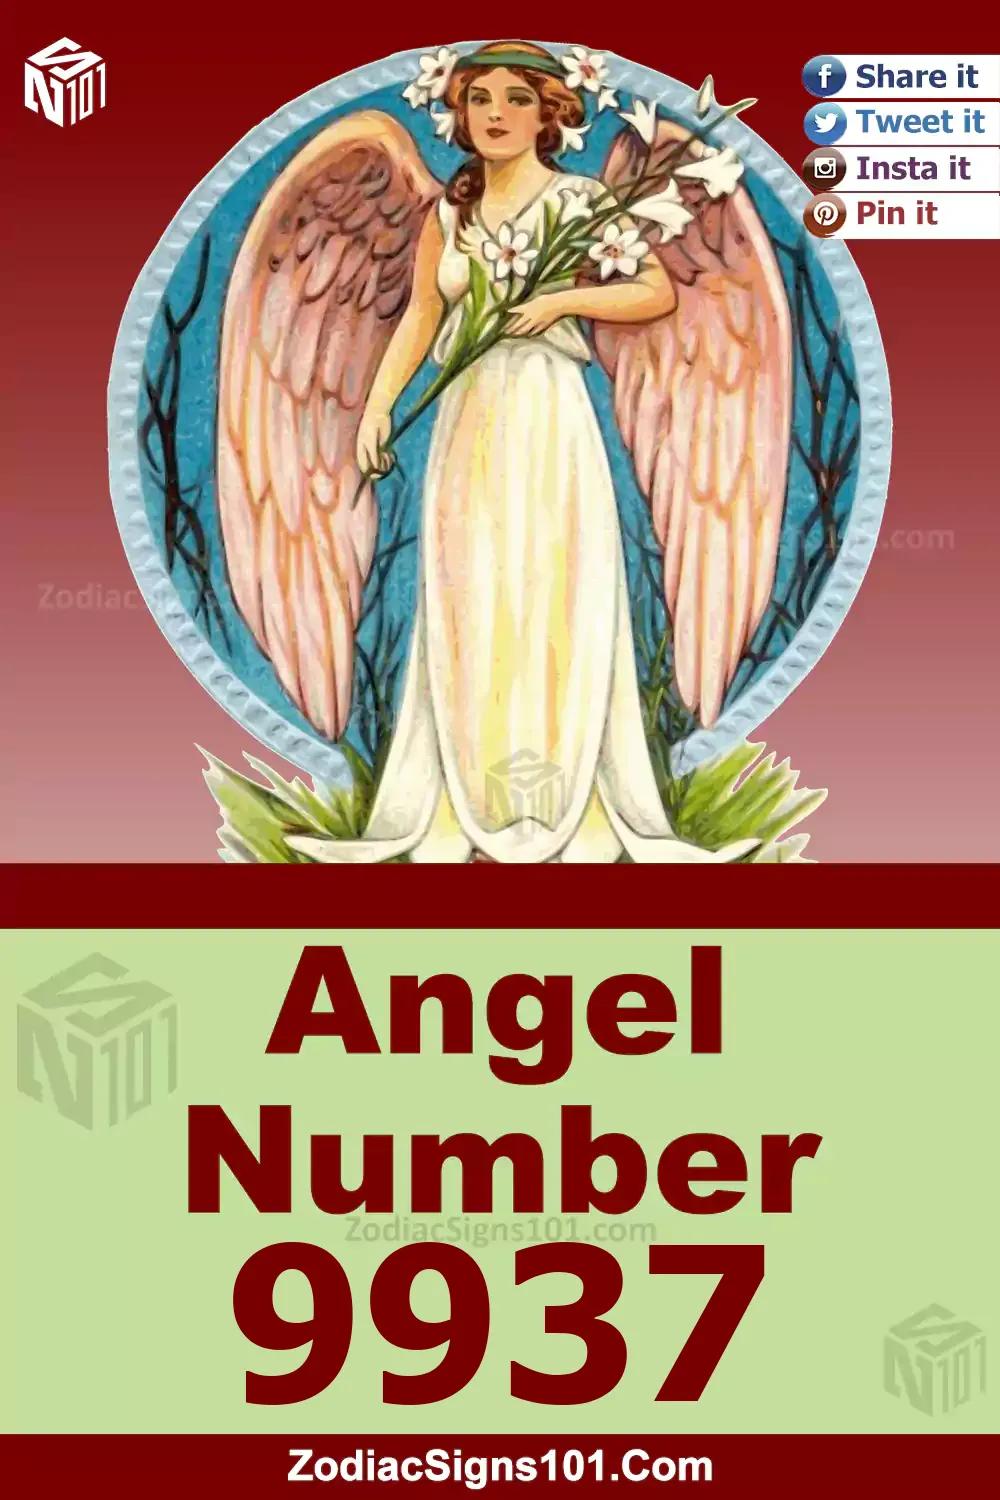 9937 Angel Number Meaning